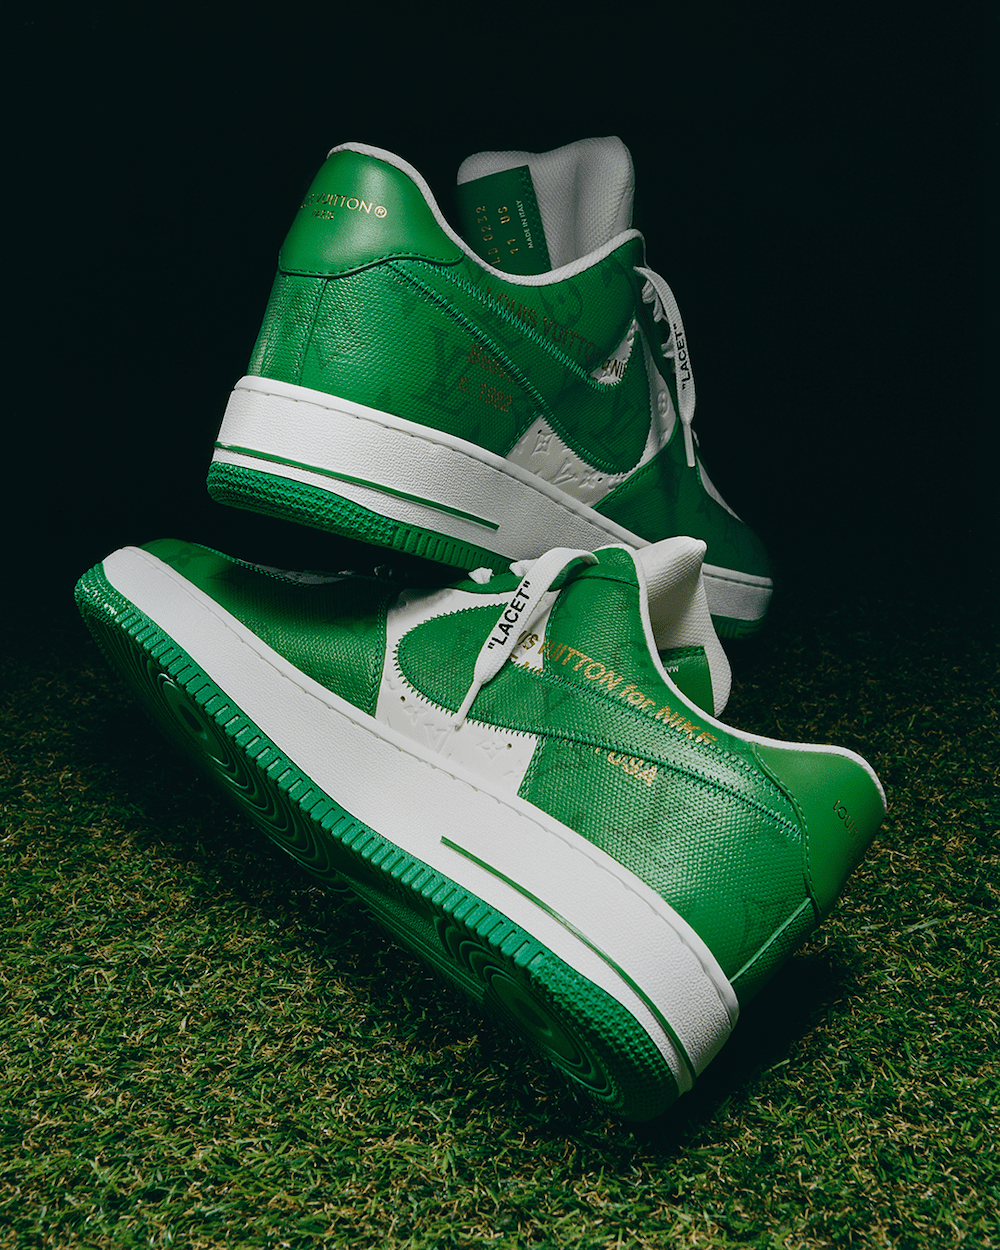 Digital drop: Louis Vuitton and Nike launch “Air Force 1” by